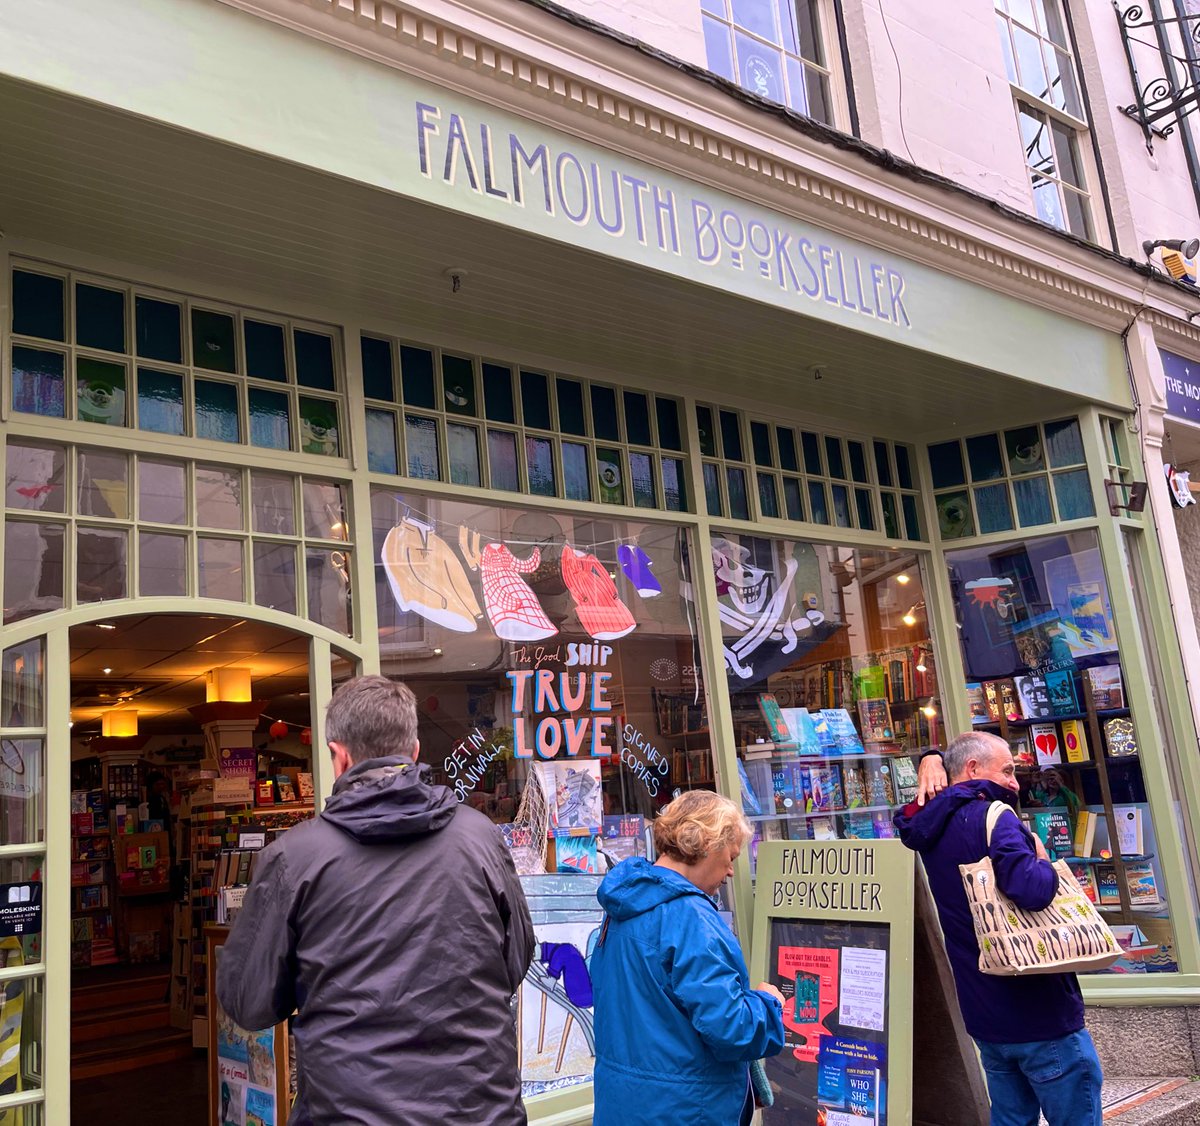 We recently had a night away in Falmouth and, as a new author, I found it impossible to go into one of these lovely bookshops without imagining my book on the shelves. #exciting #debutauthor #writingcommunity #beerandbooks #independentbookshops